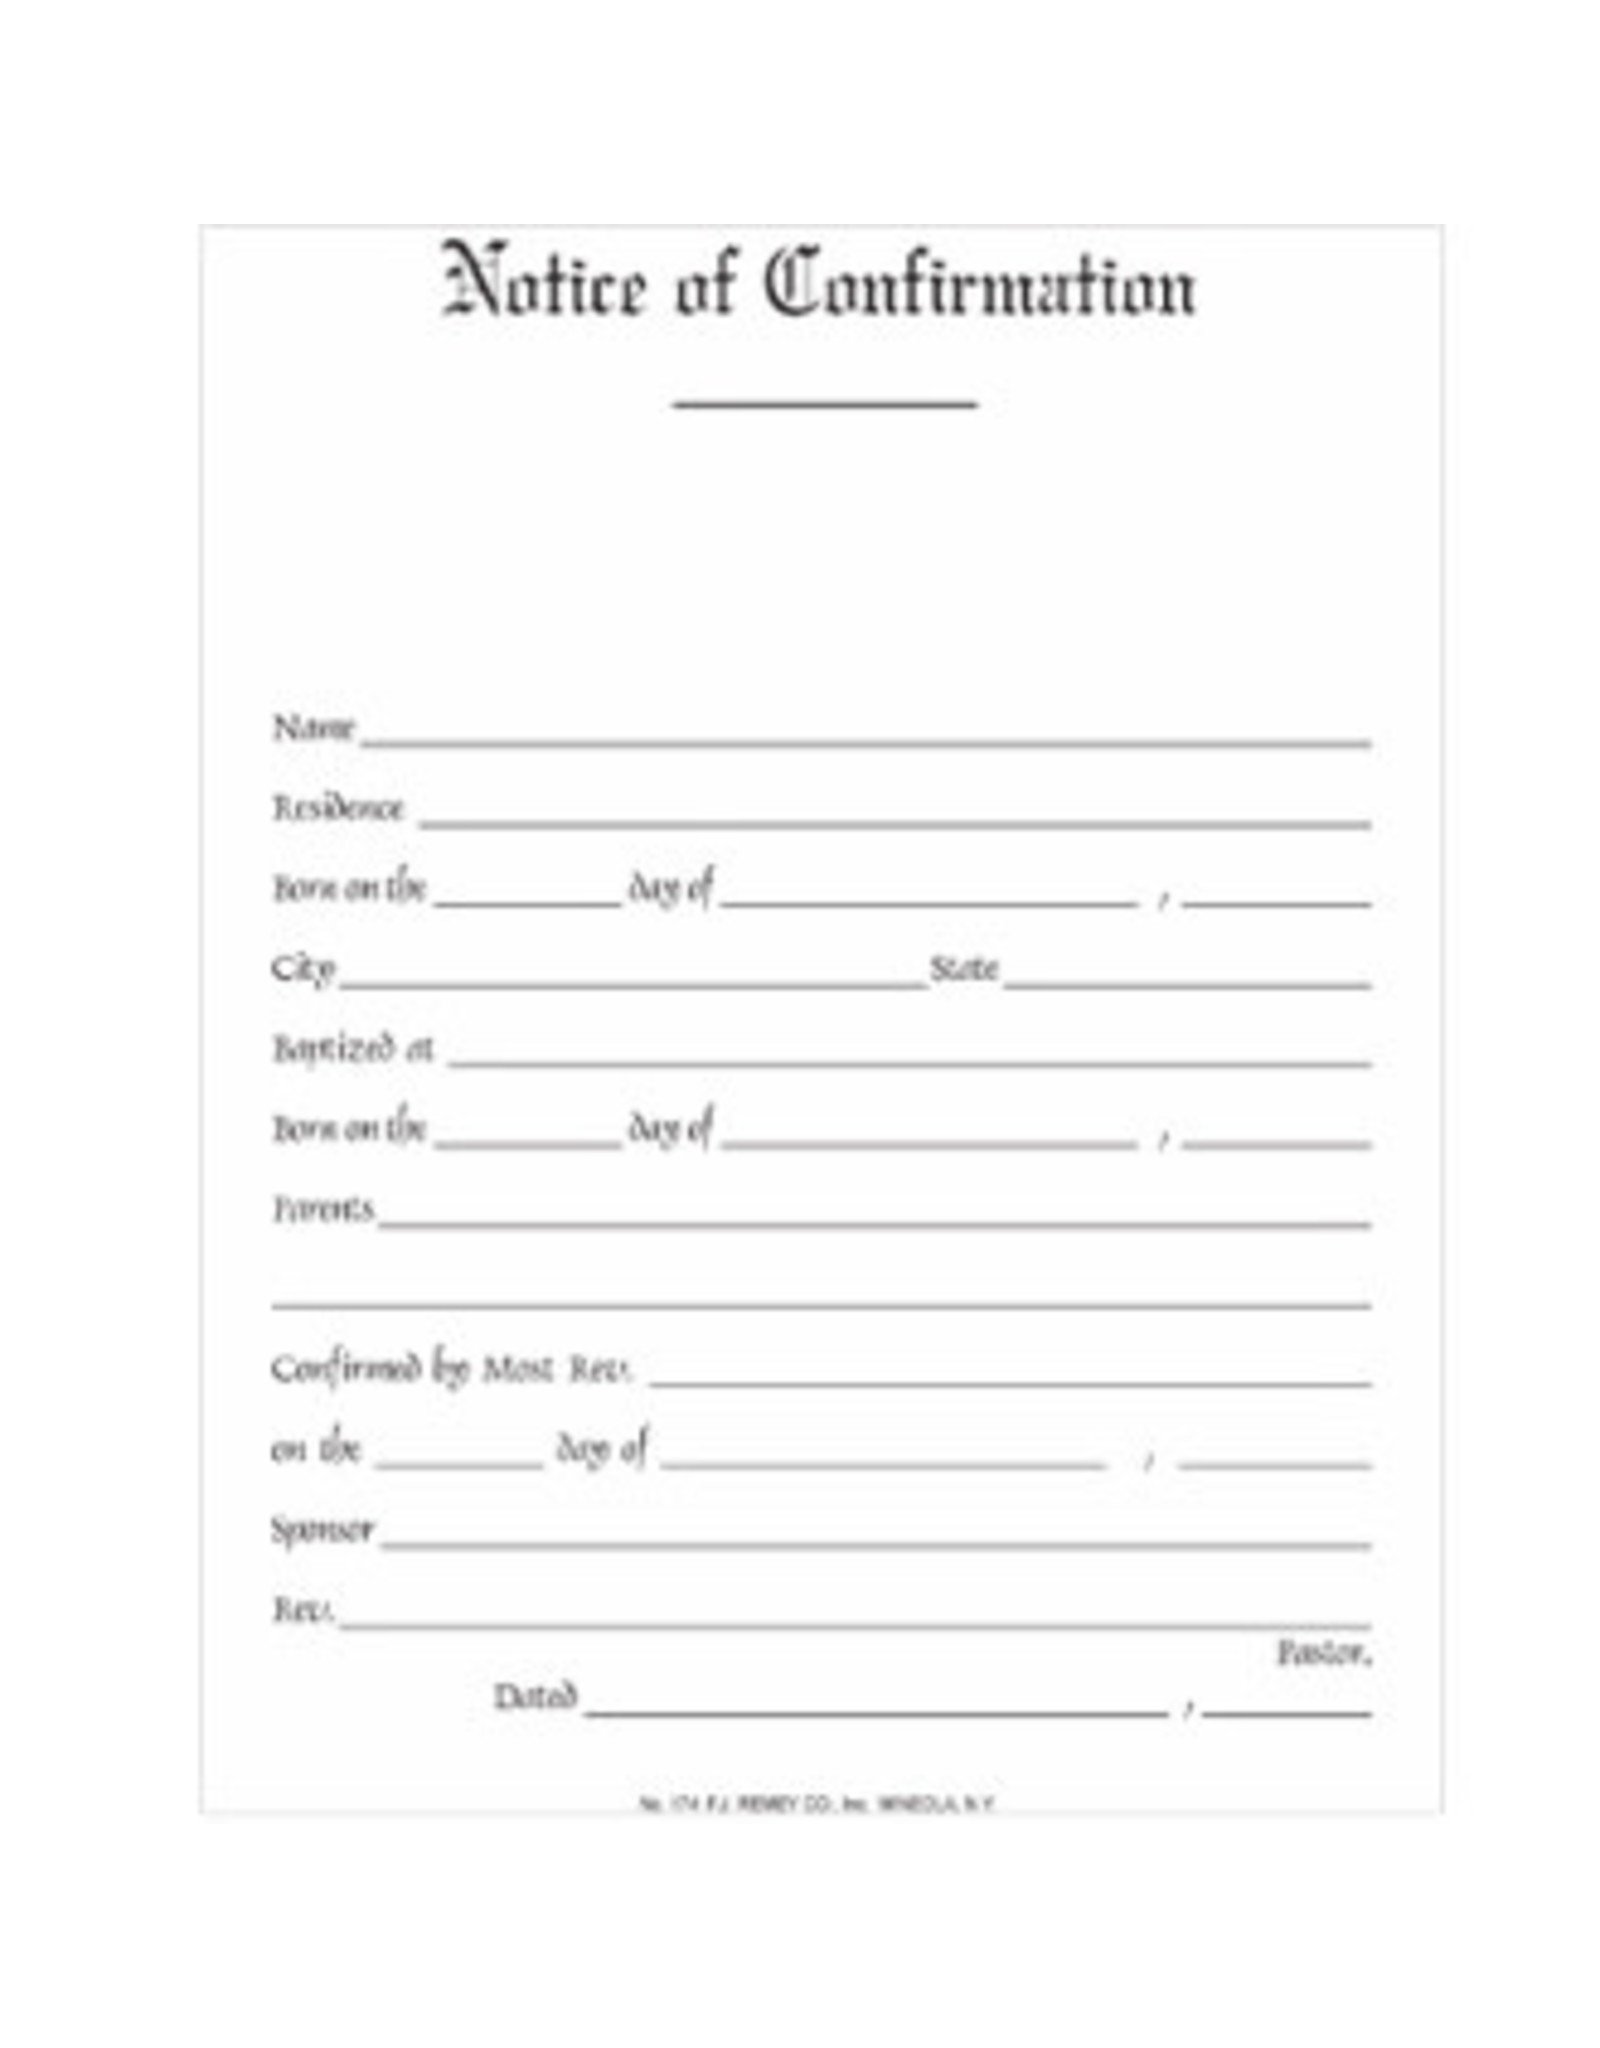 Notice of Confirmation (Pad of 50)